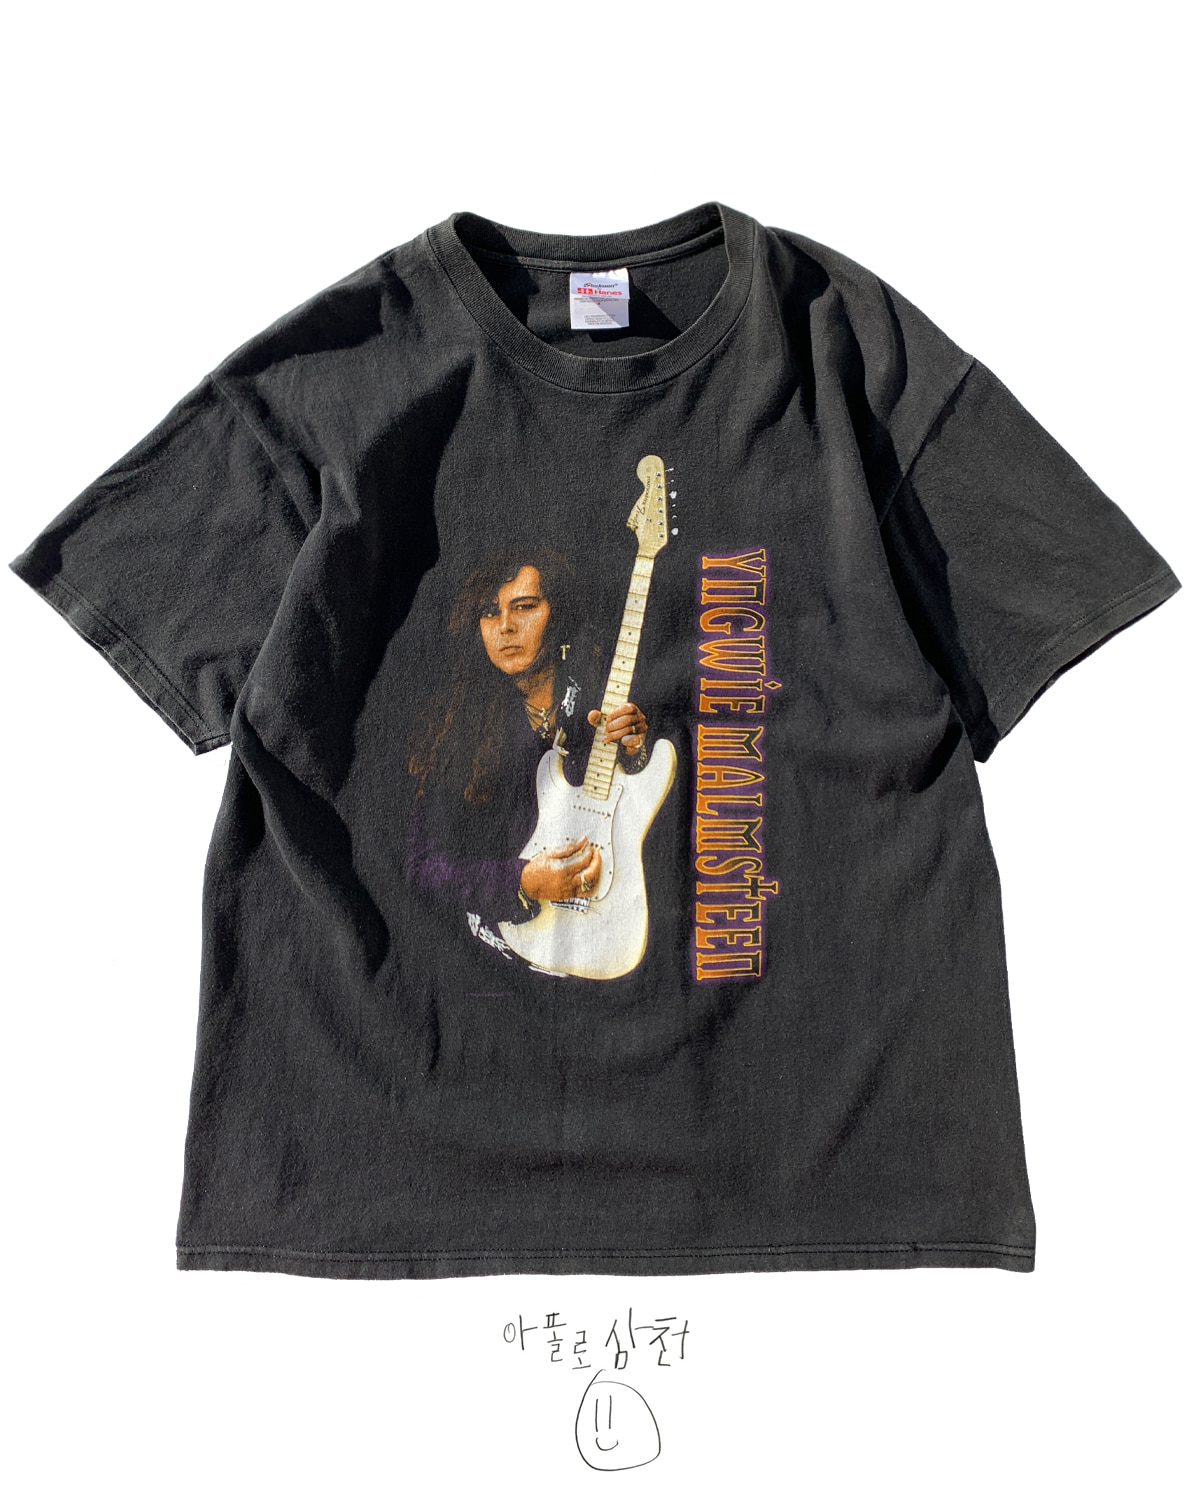 Vintage Authentic 100% Rock Band Yngwie Malmsteen T-Shirts Hanes 1998년 제작